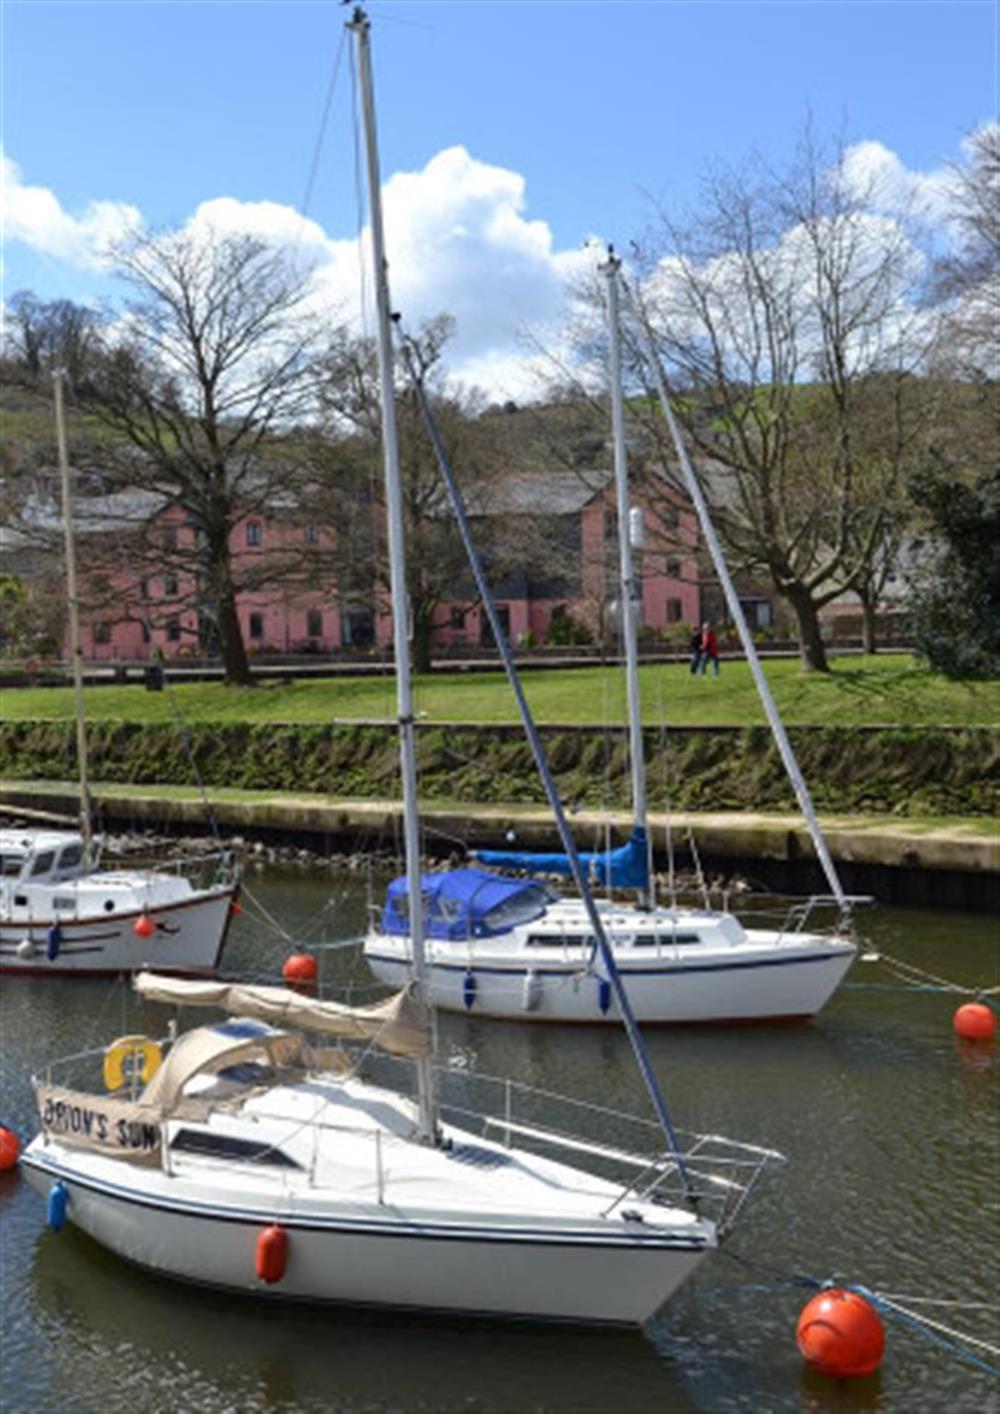 Boats on the River Dart in Totnes